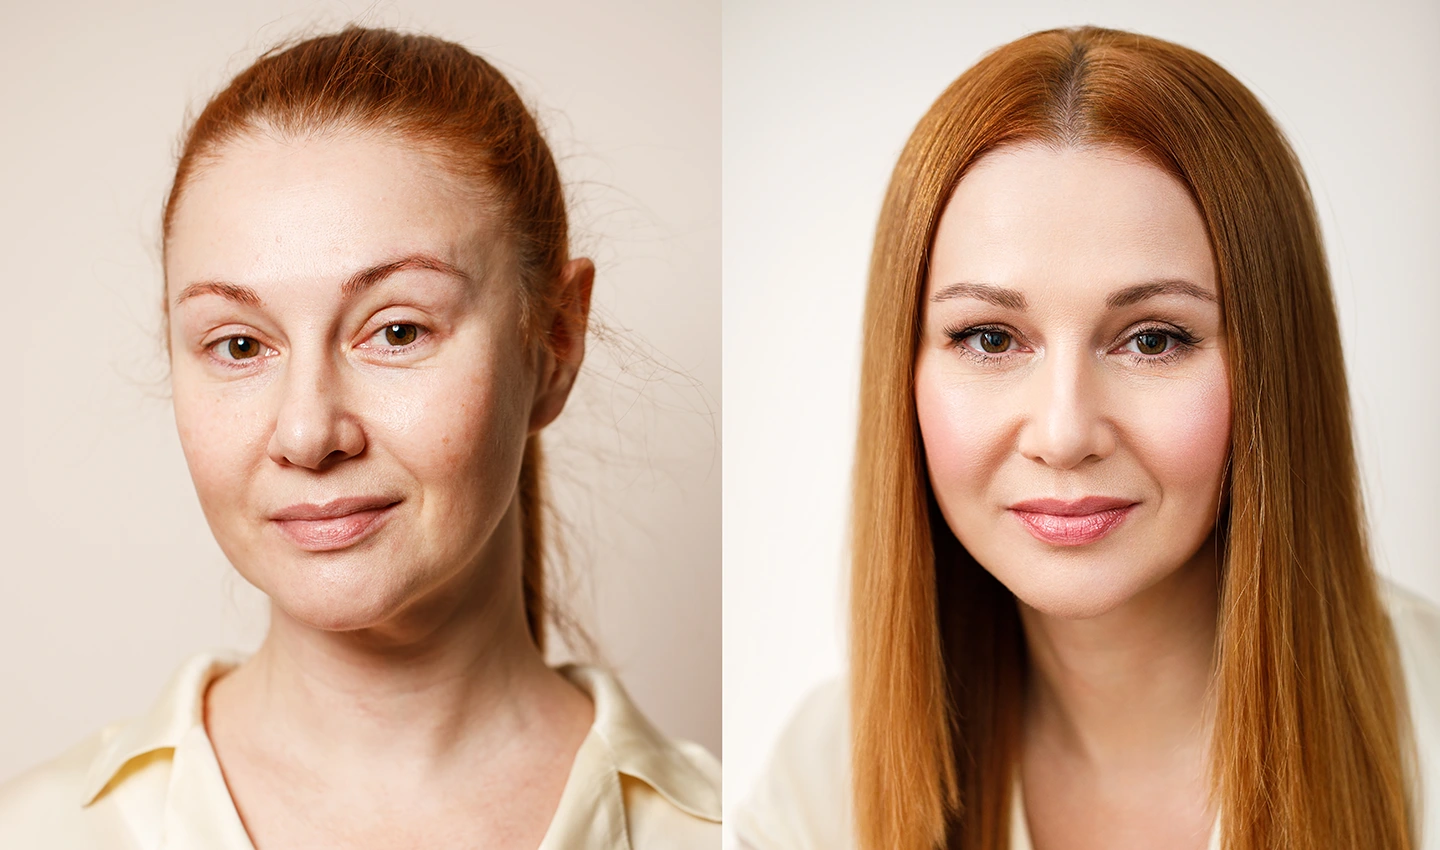 Facelift Success Stories from Real Patients who Share their Before and After Photos